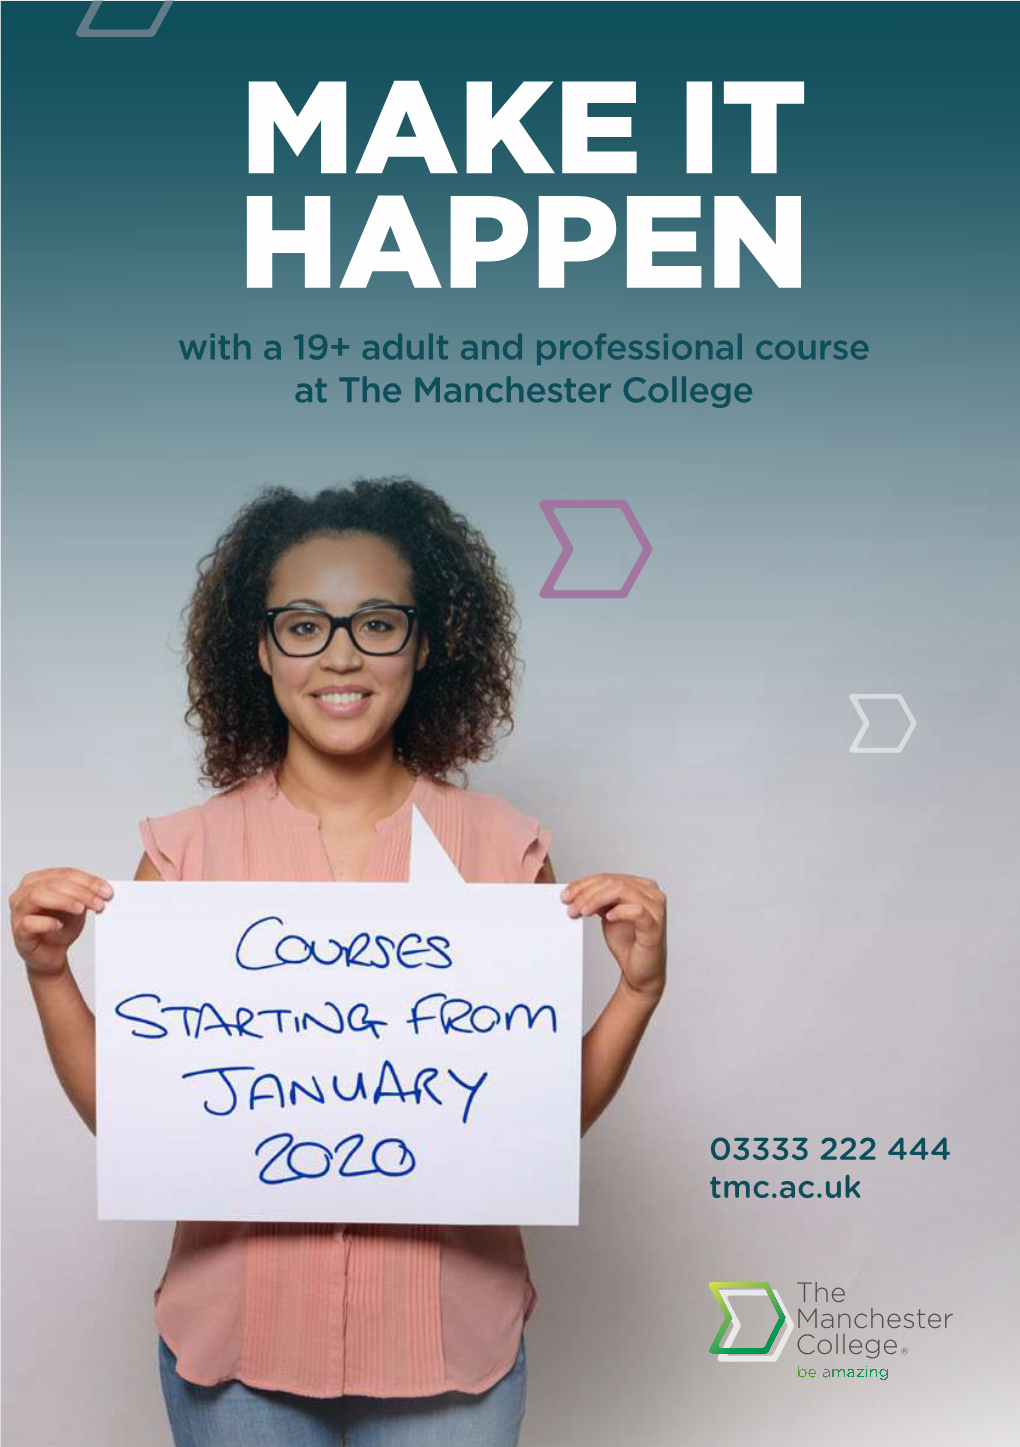 MAKE IT HAPPEN with a 19+ Adult and Professional Course at the Manchester College